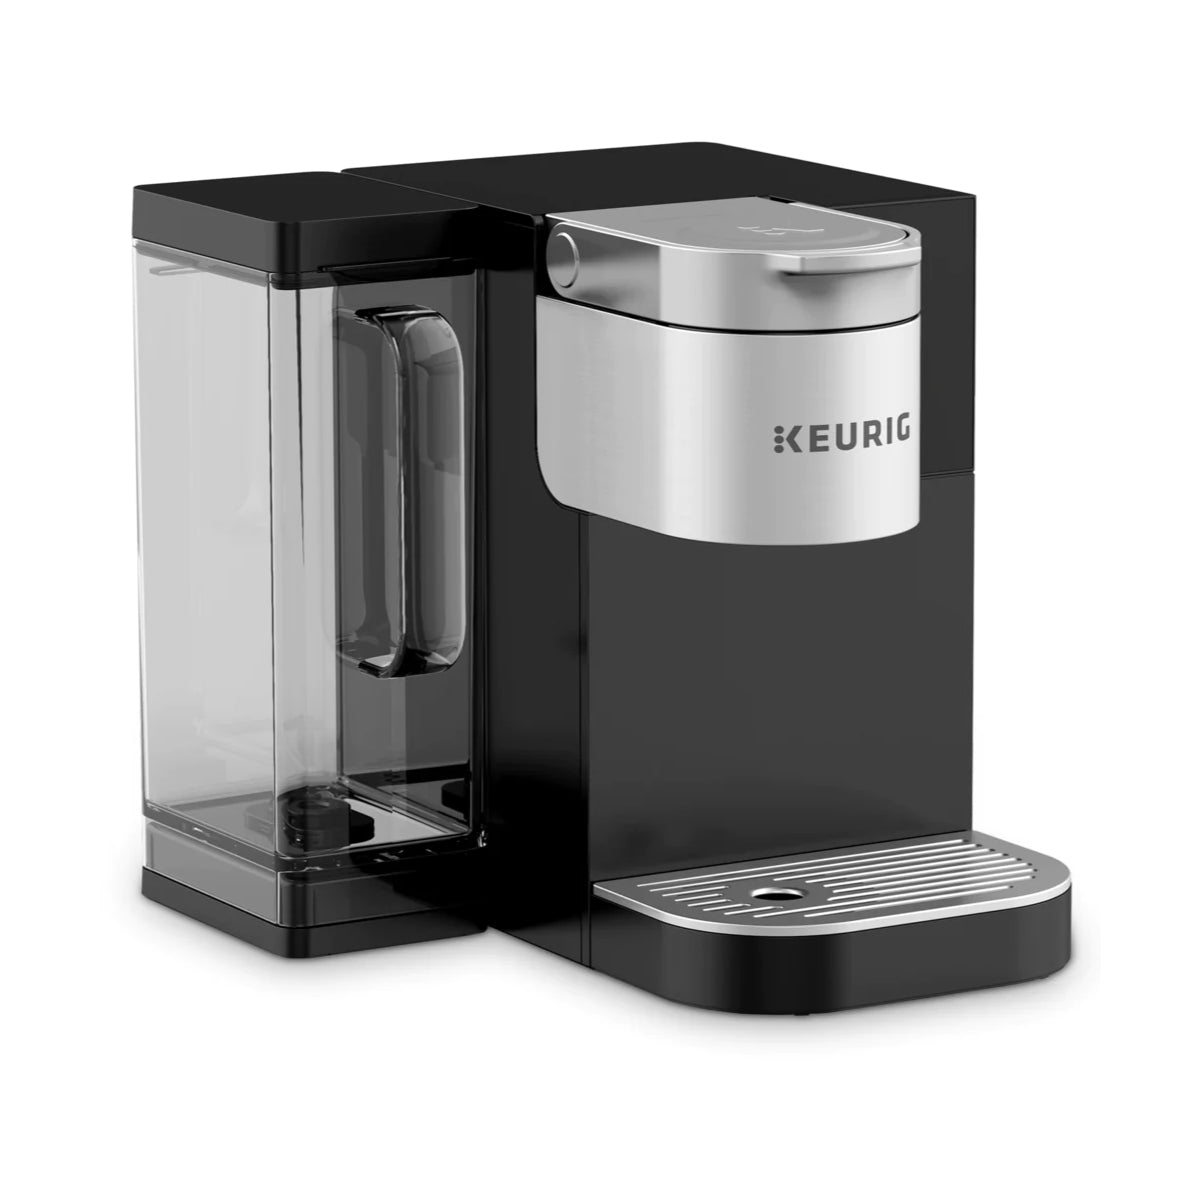 Keurig K2500 Commercial K-Cup® Pod Coffee Brewing System with Water Reservoir (Black)